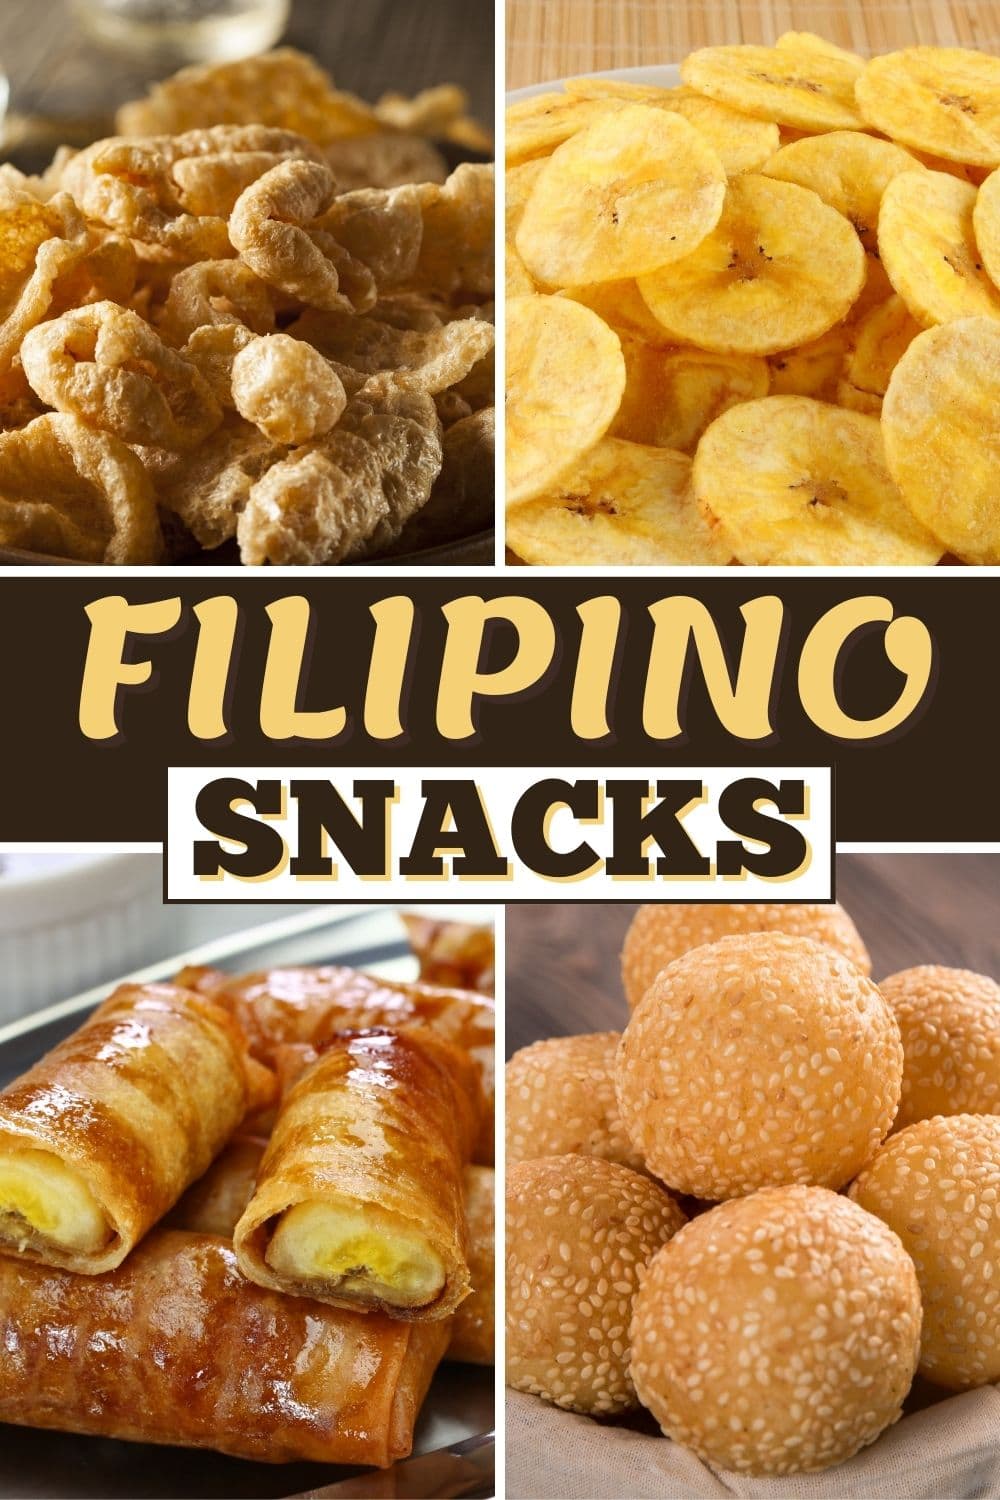 7 Unique Filipino Snacks You Need To Try - vrogue.co